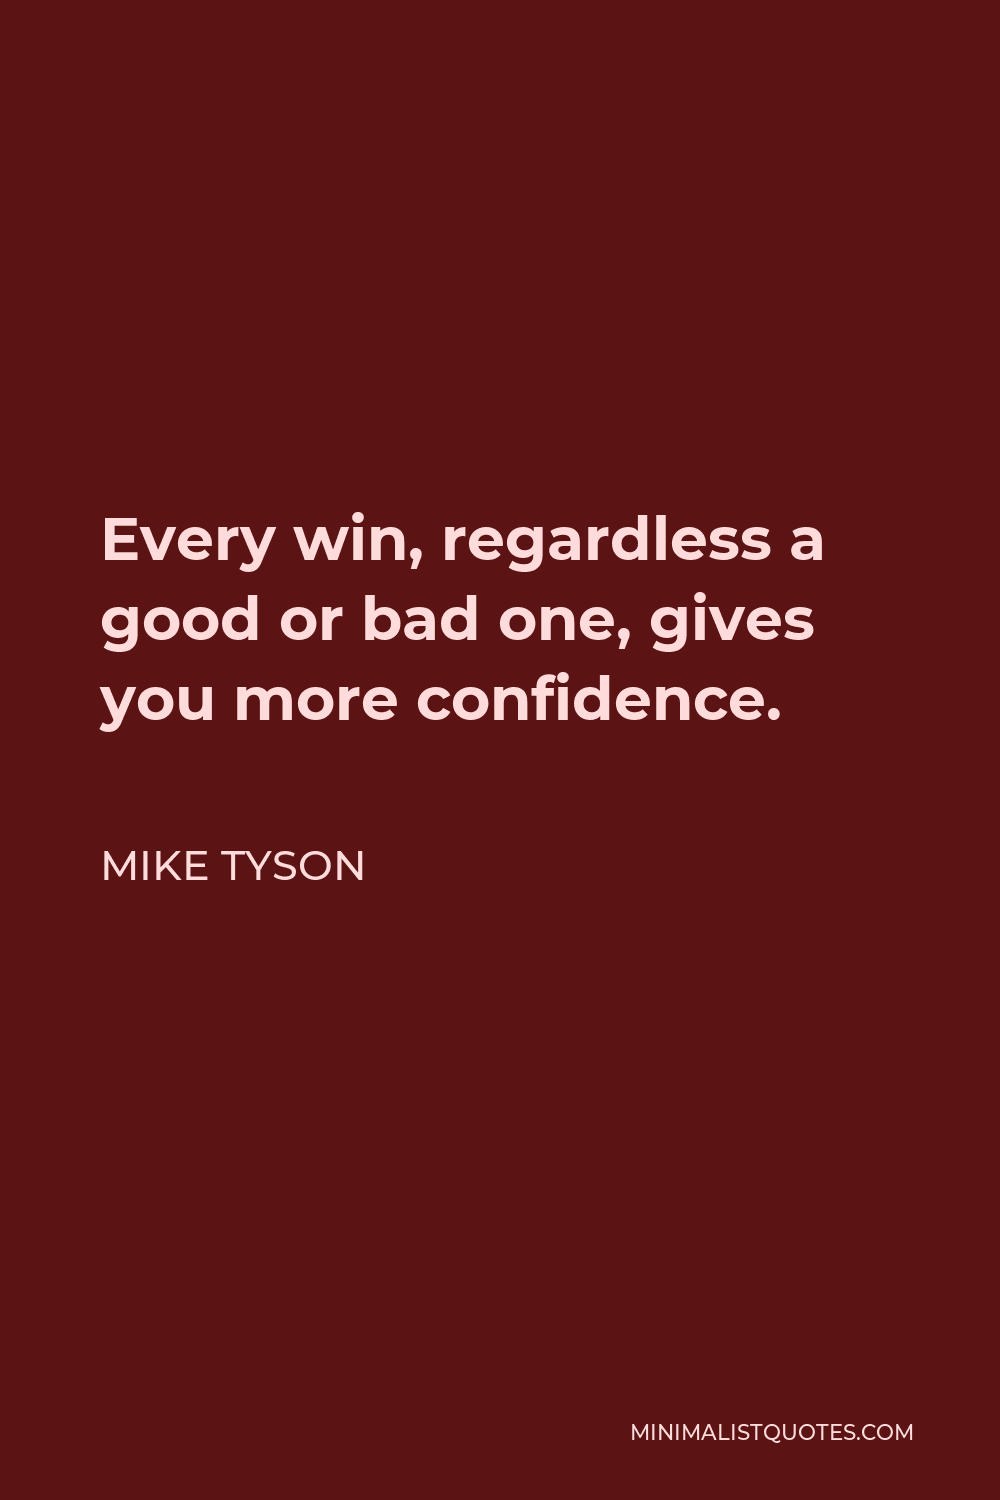 Mike Tyson Quote - Every win, regardless a good or bad one, gives you more confidence.